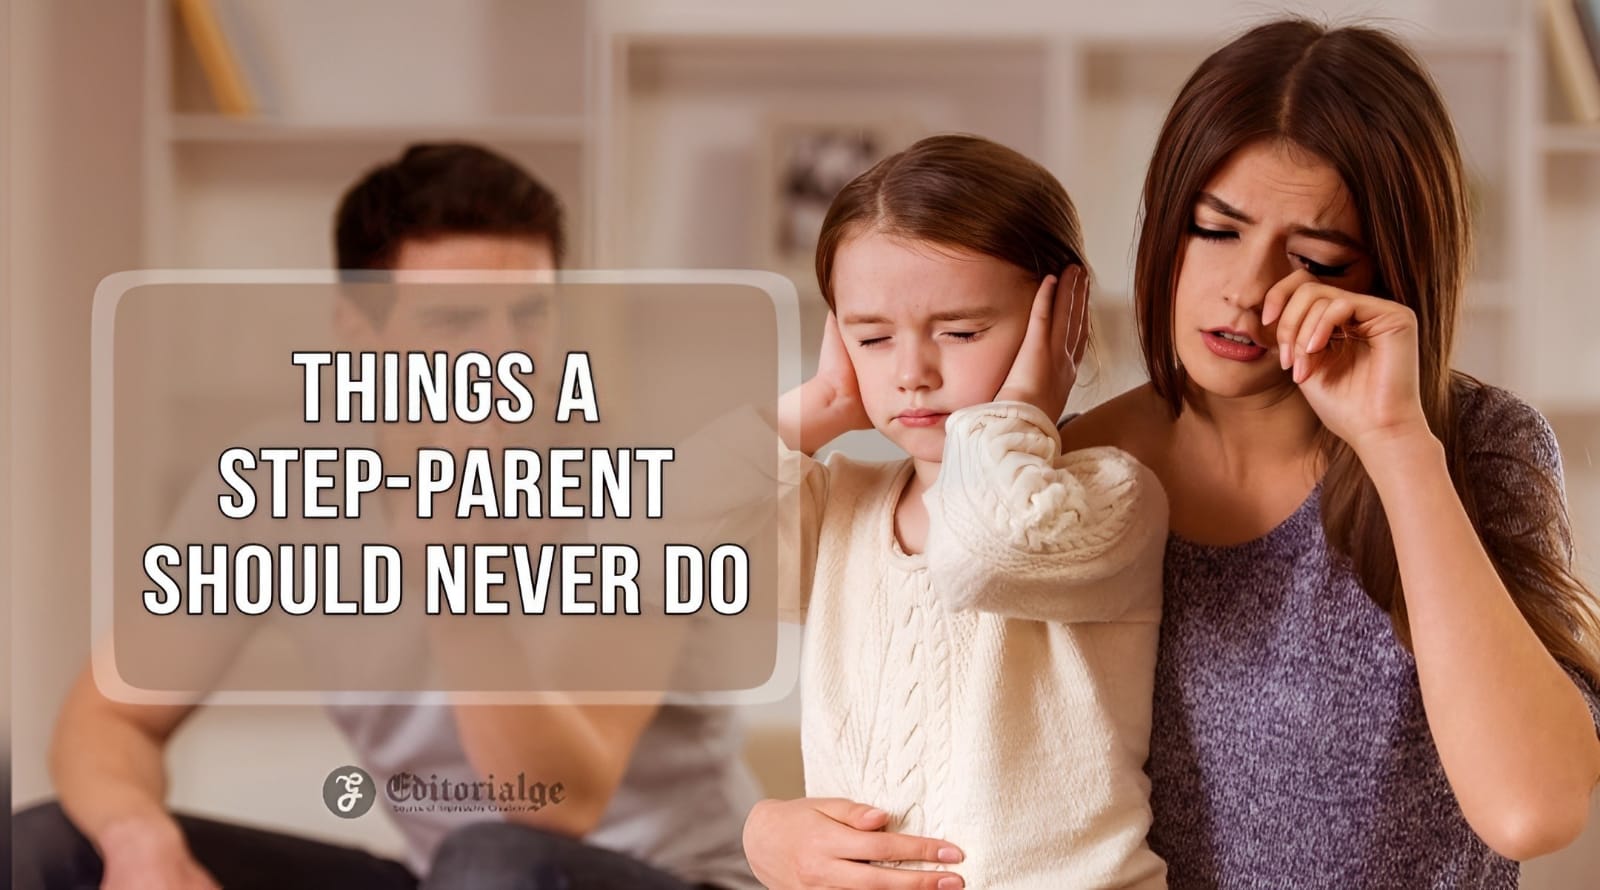 Things a step-parent should never do